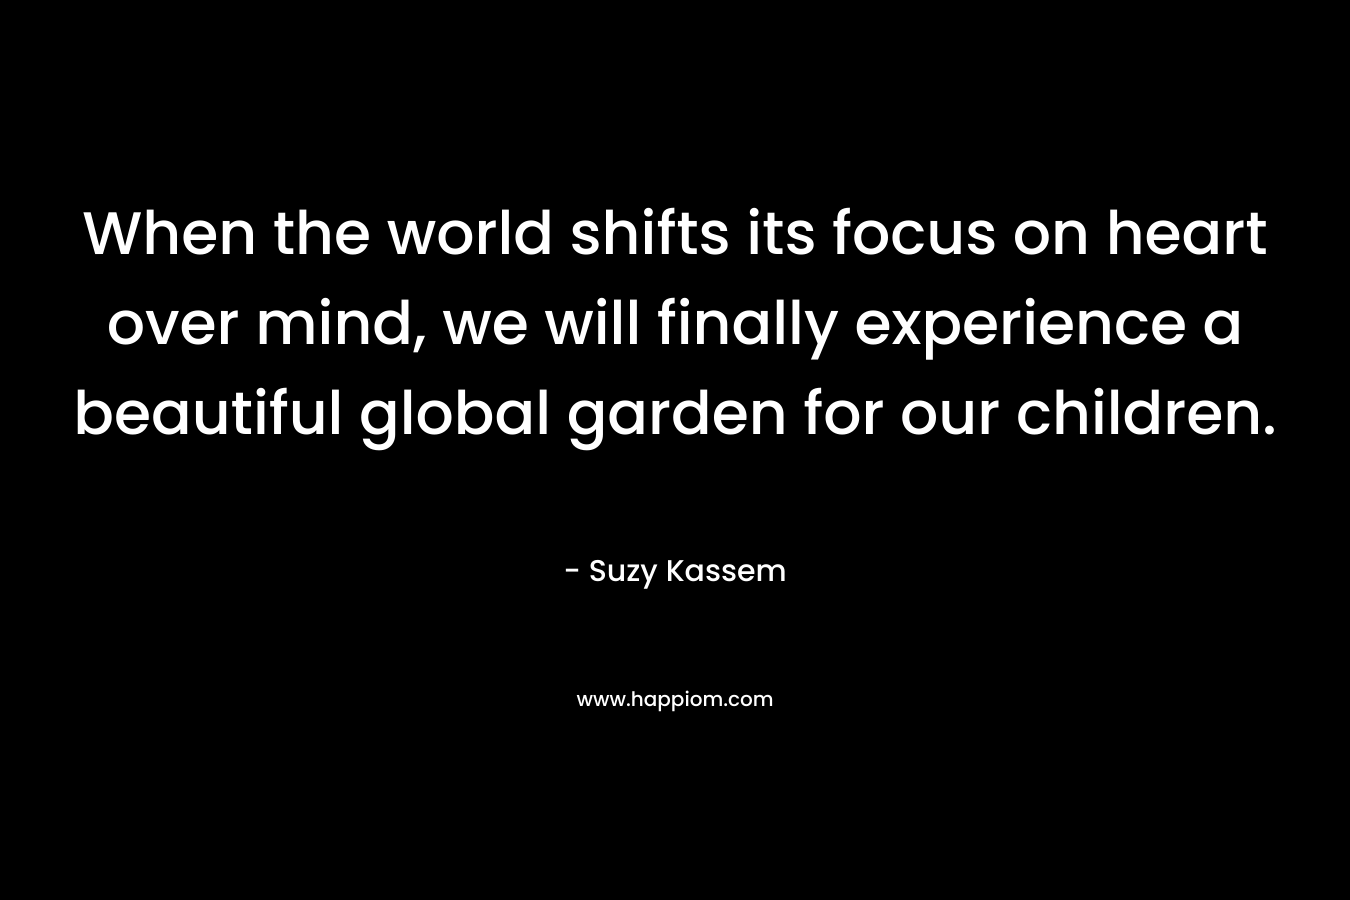 When the world shifts its focus on heart over mind, we will finally experience a beautiful global garden for our children.